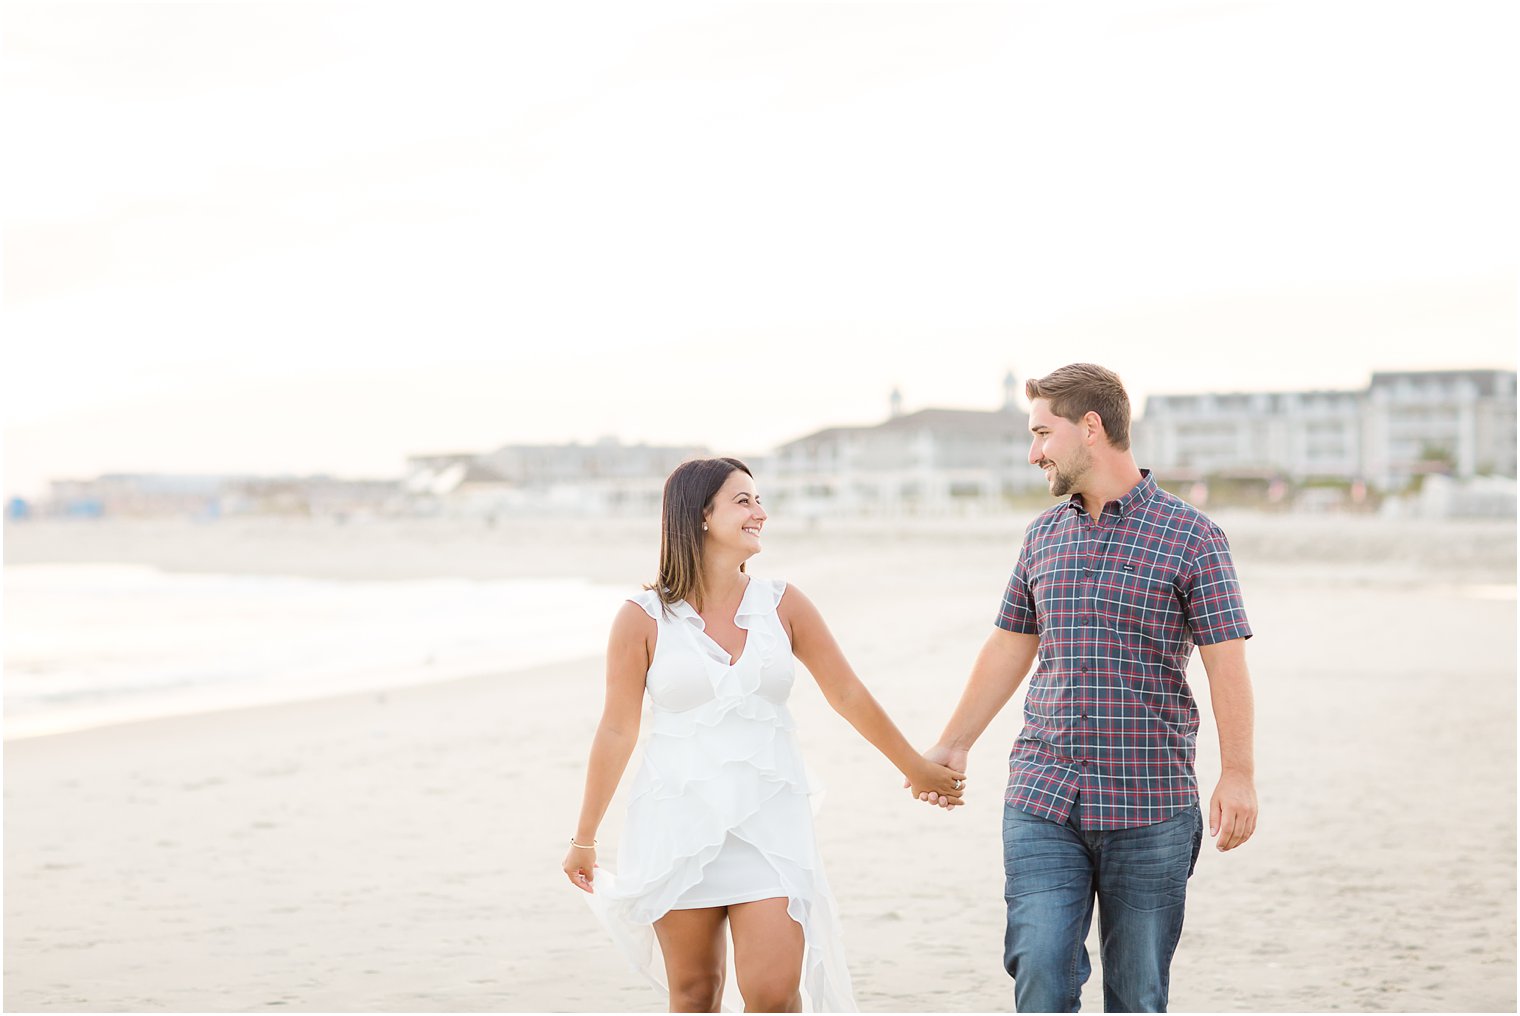 Engagement photo in Cape May NJ